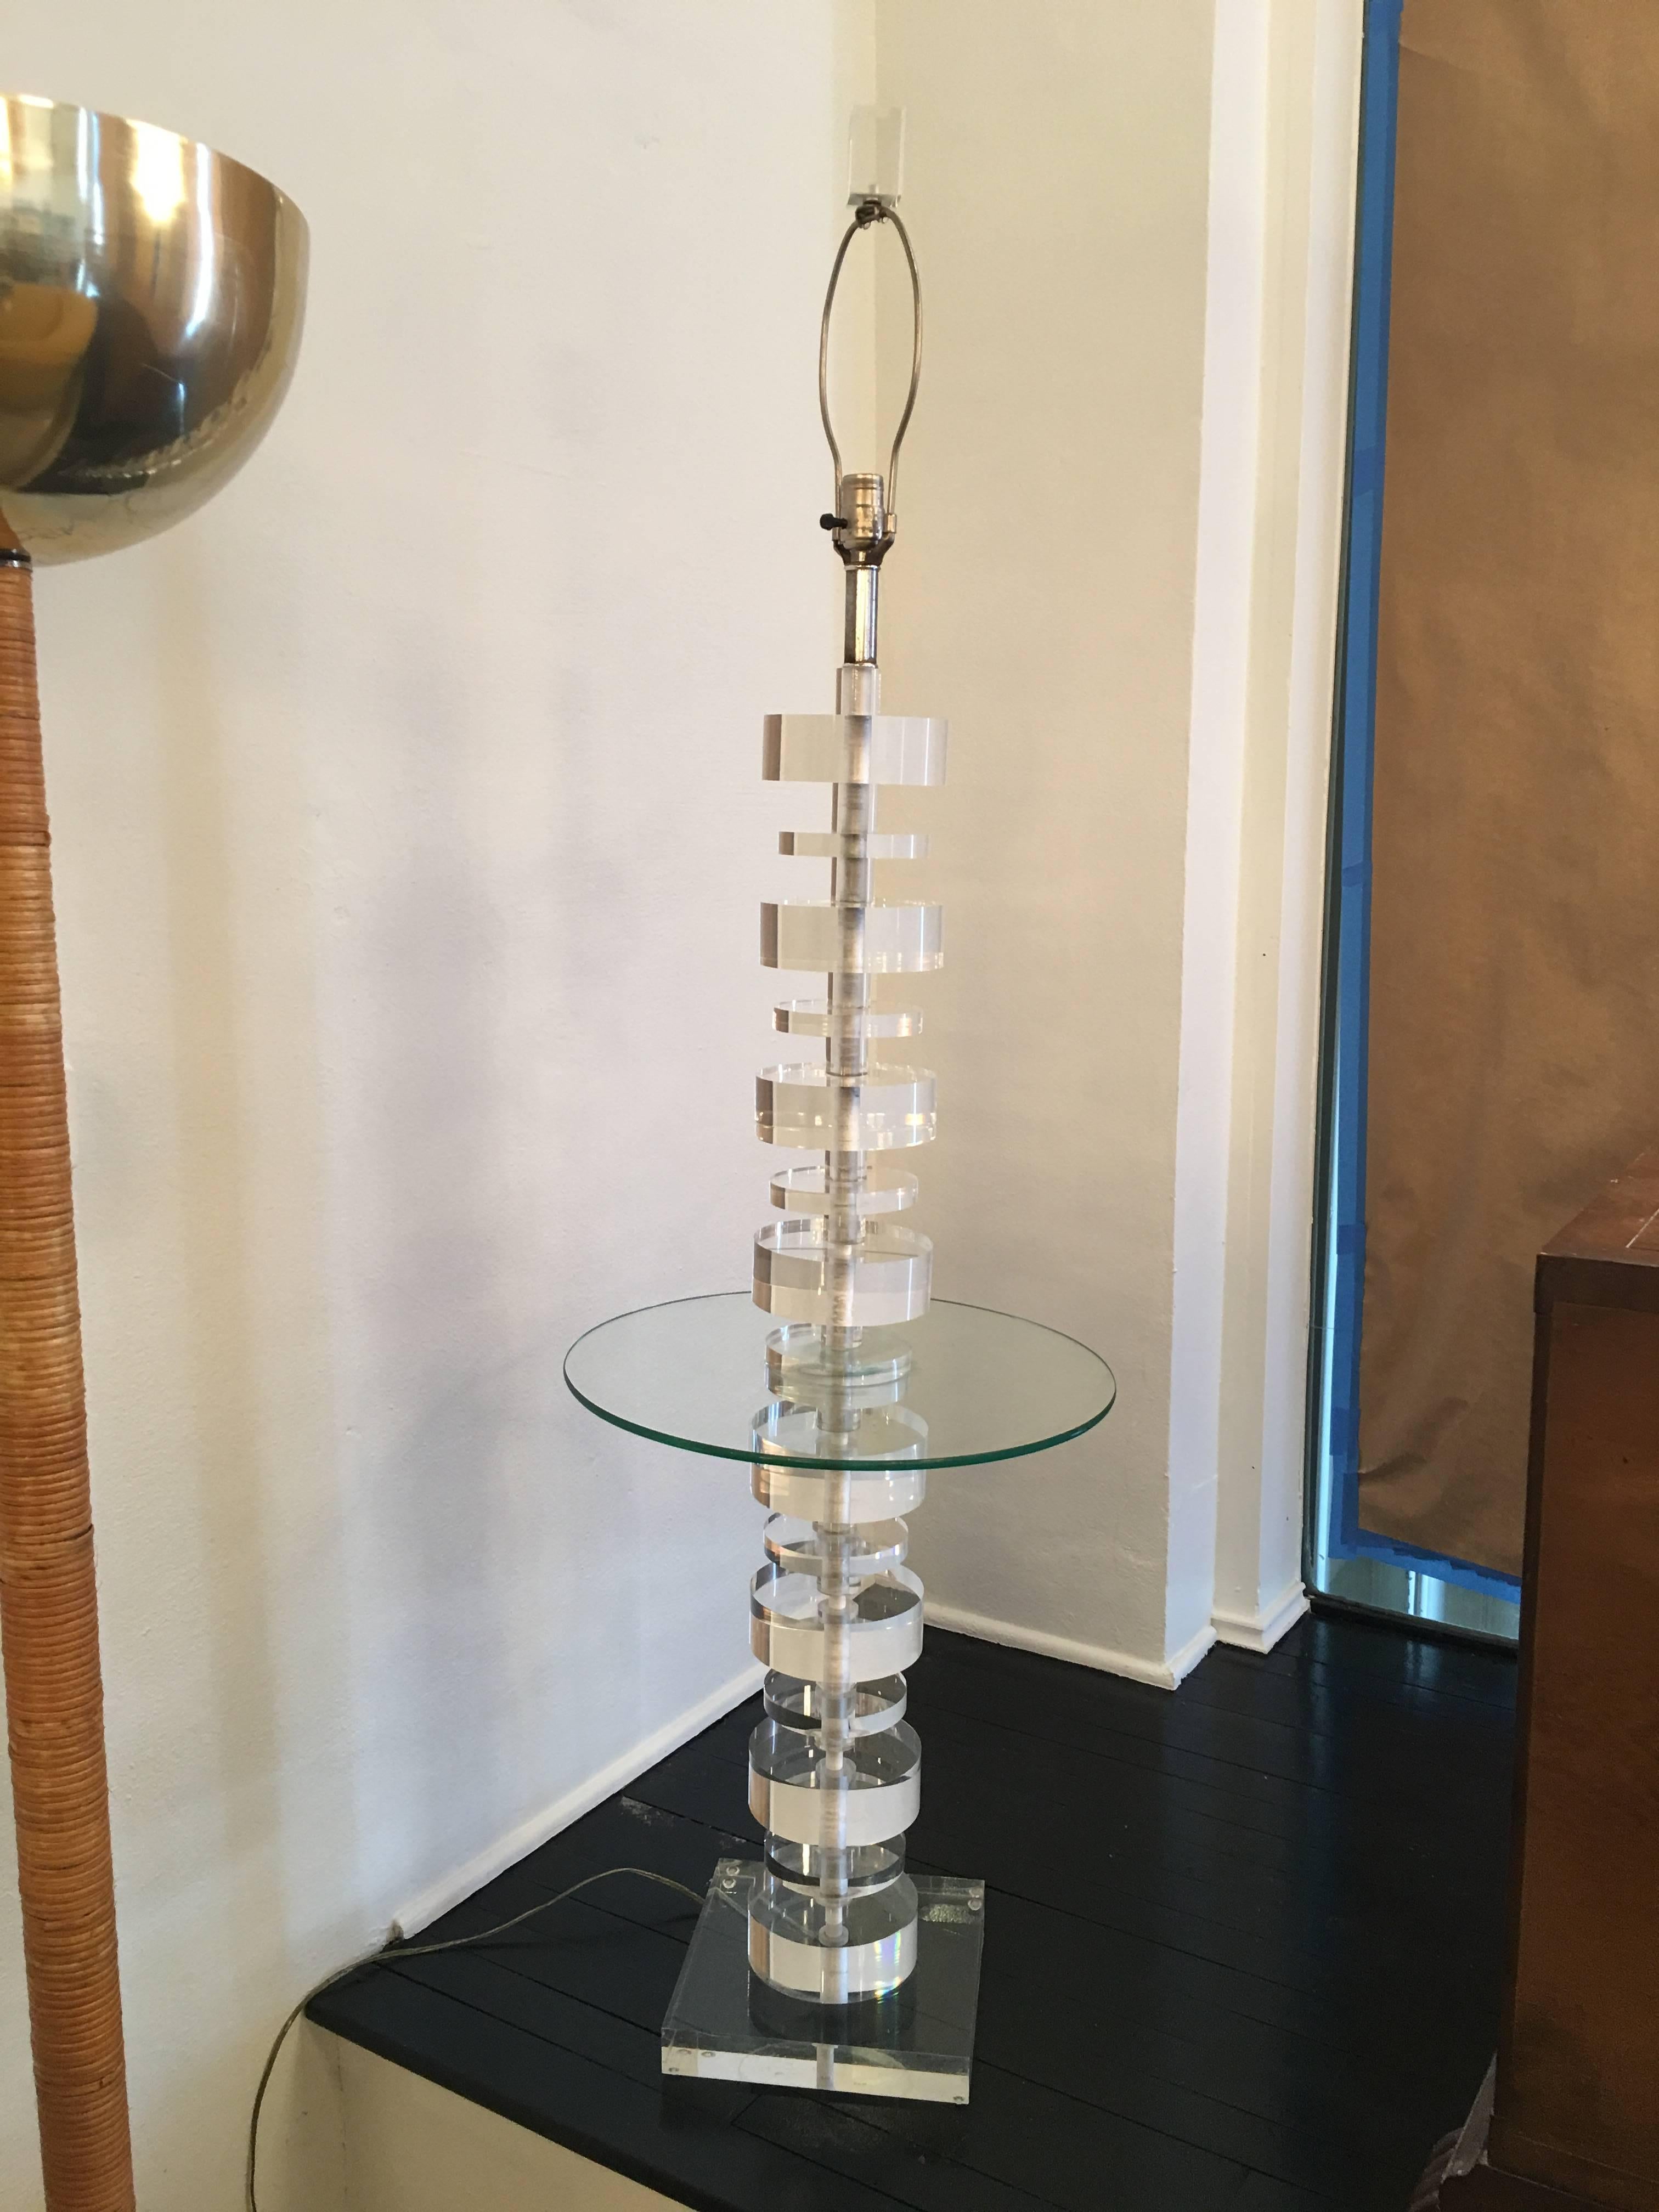 Amazing vintage Lucite floor table lamp. Very heavy! The large disks measure 2 x 6. The height is 51 to socket and 61 to top of Lucite finial. Original Lucite finial included. Tested, working order.